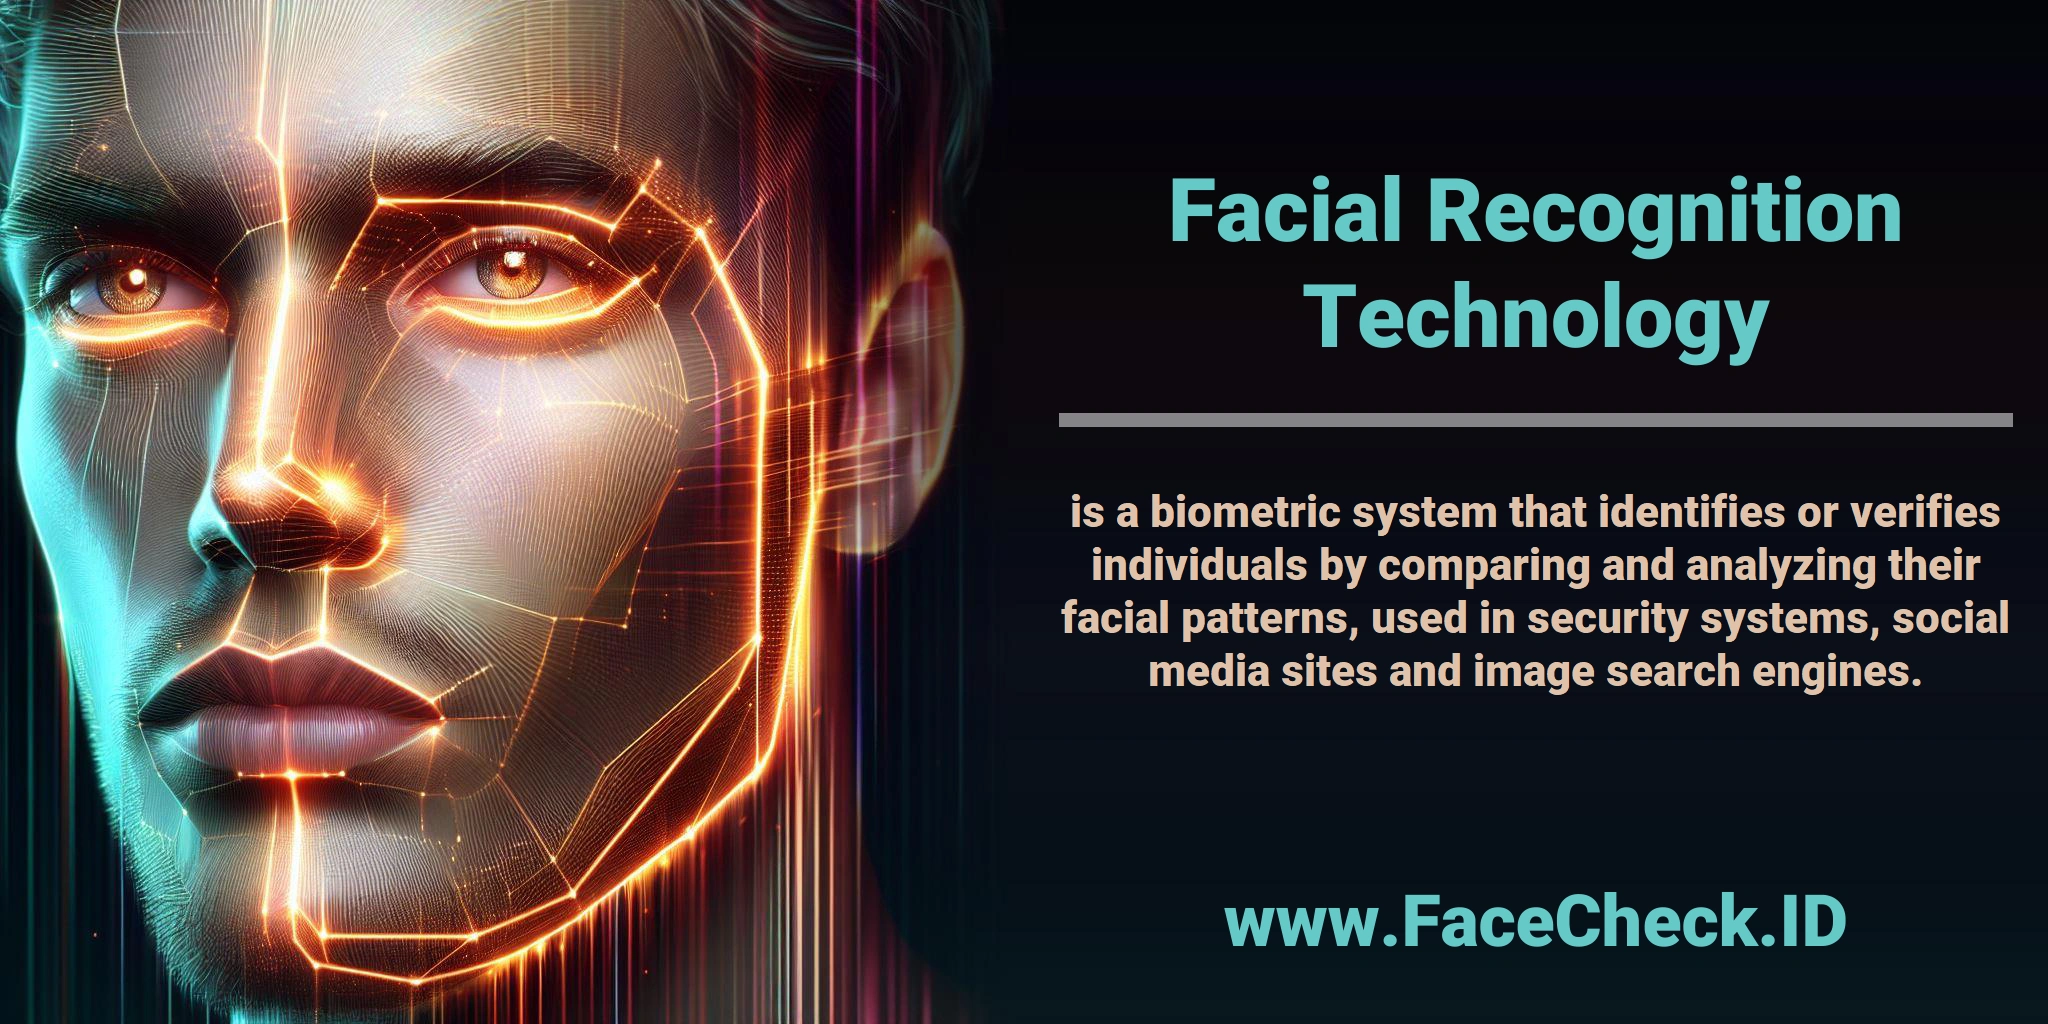 <b>Facial Recognition Technology</b> is a biometric system that identifies or verifies individuals by comparing and analyzing their facial patterns, used in security systems, social media sites and image search engines.